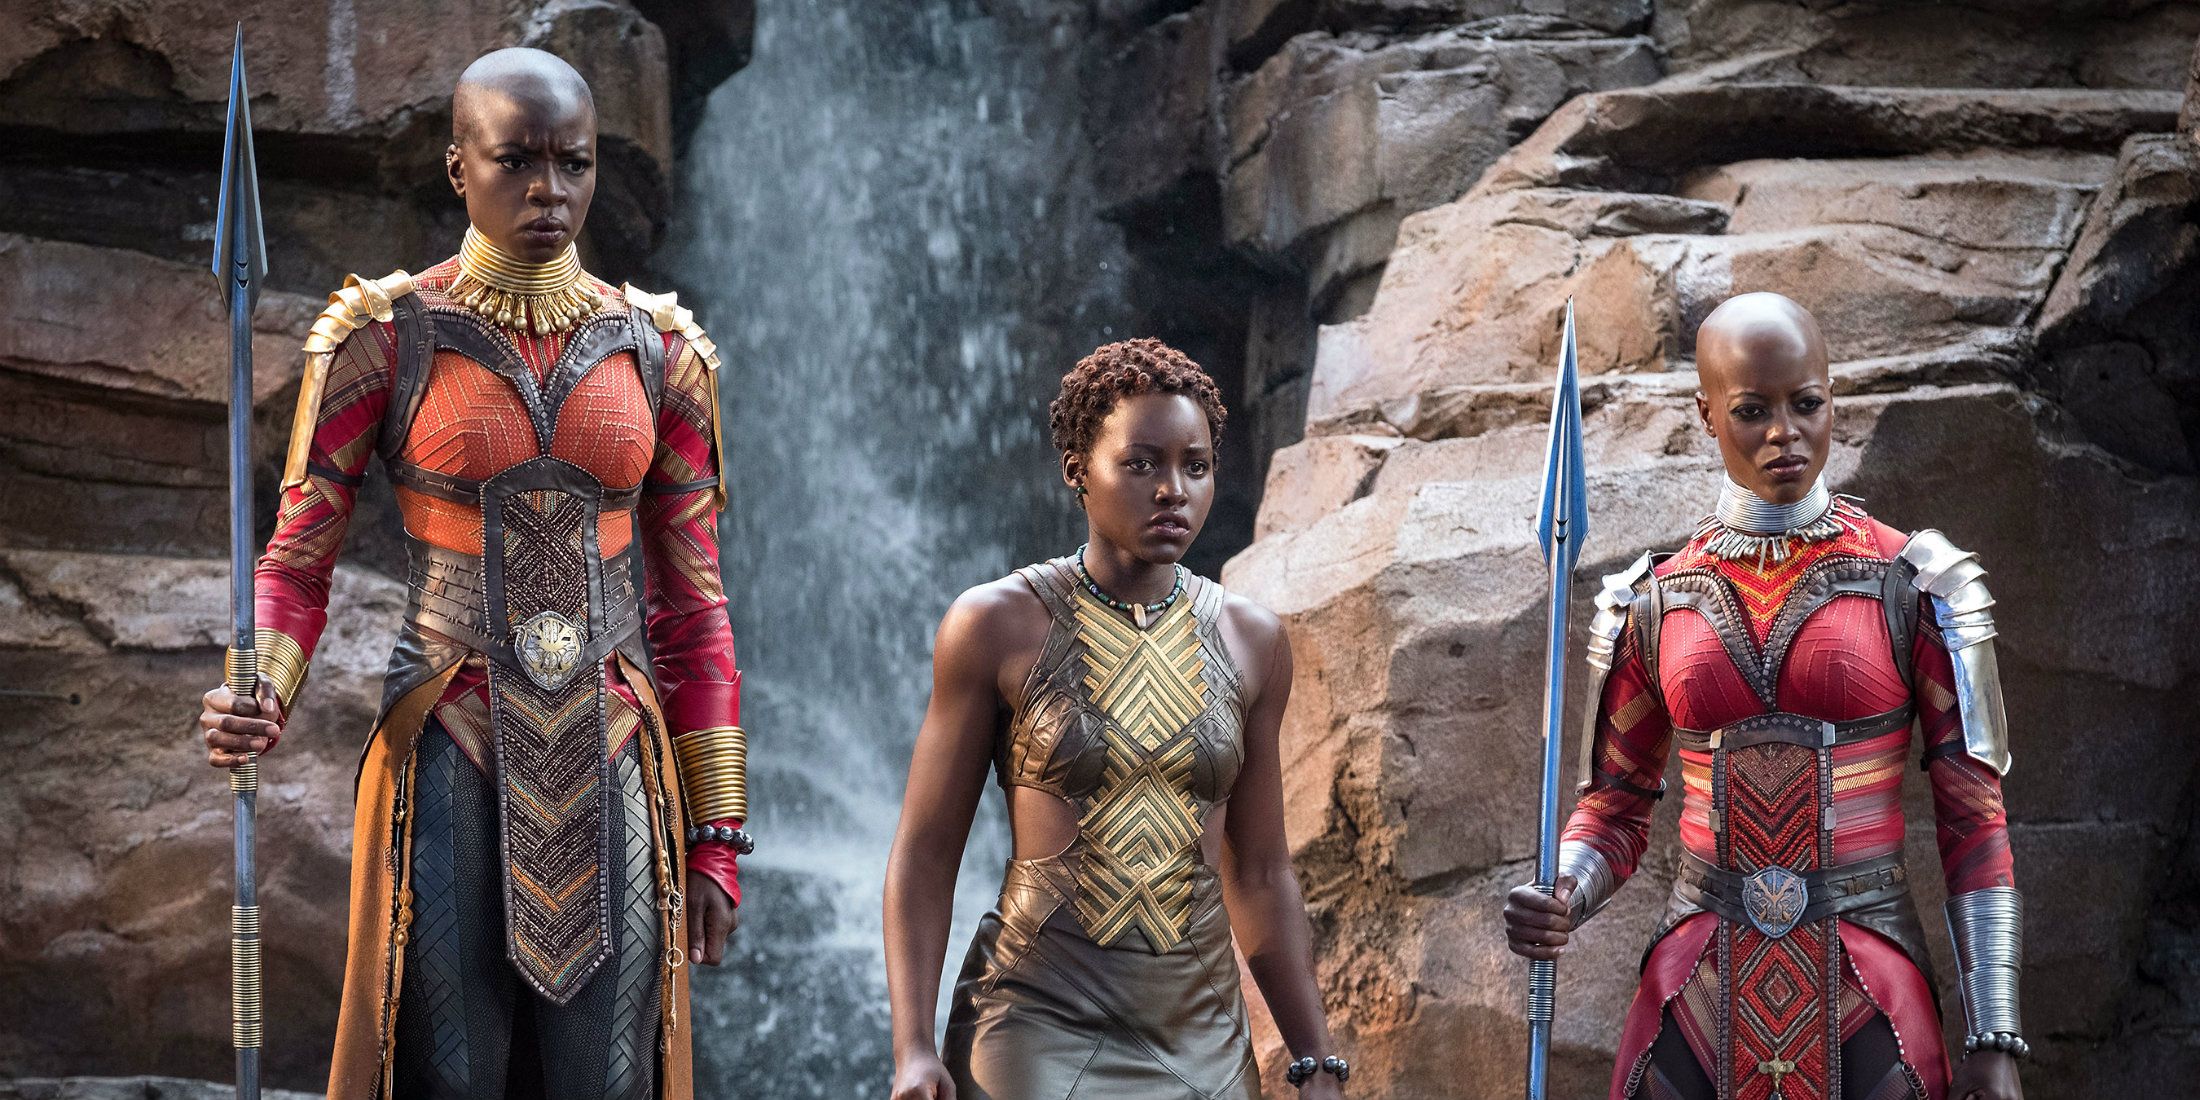 Black Panther 10 PlayedOut MCU Tropes The Disney Series Needs To Avoid